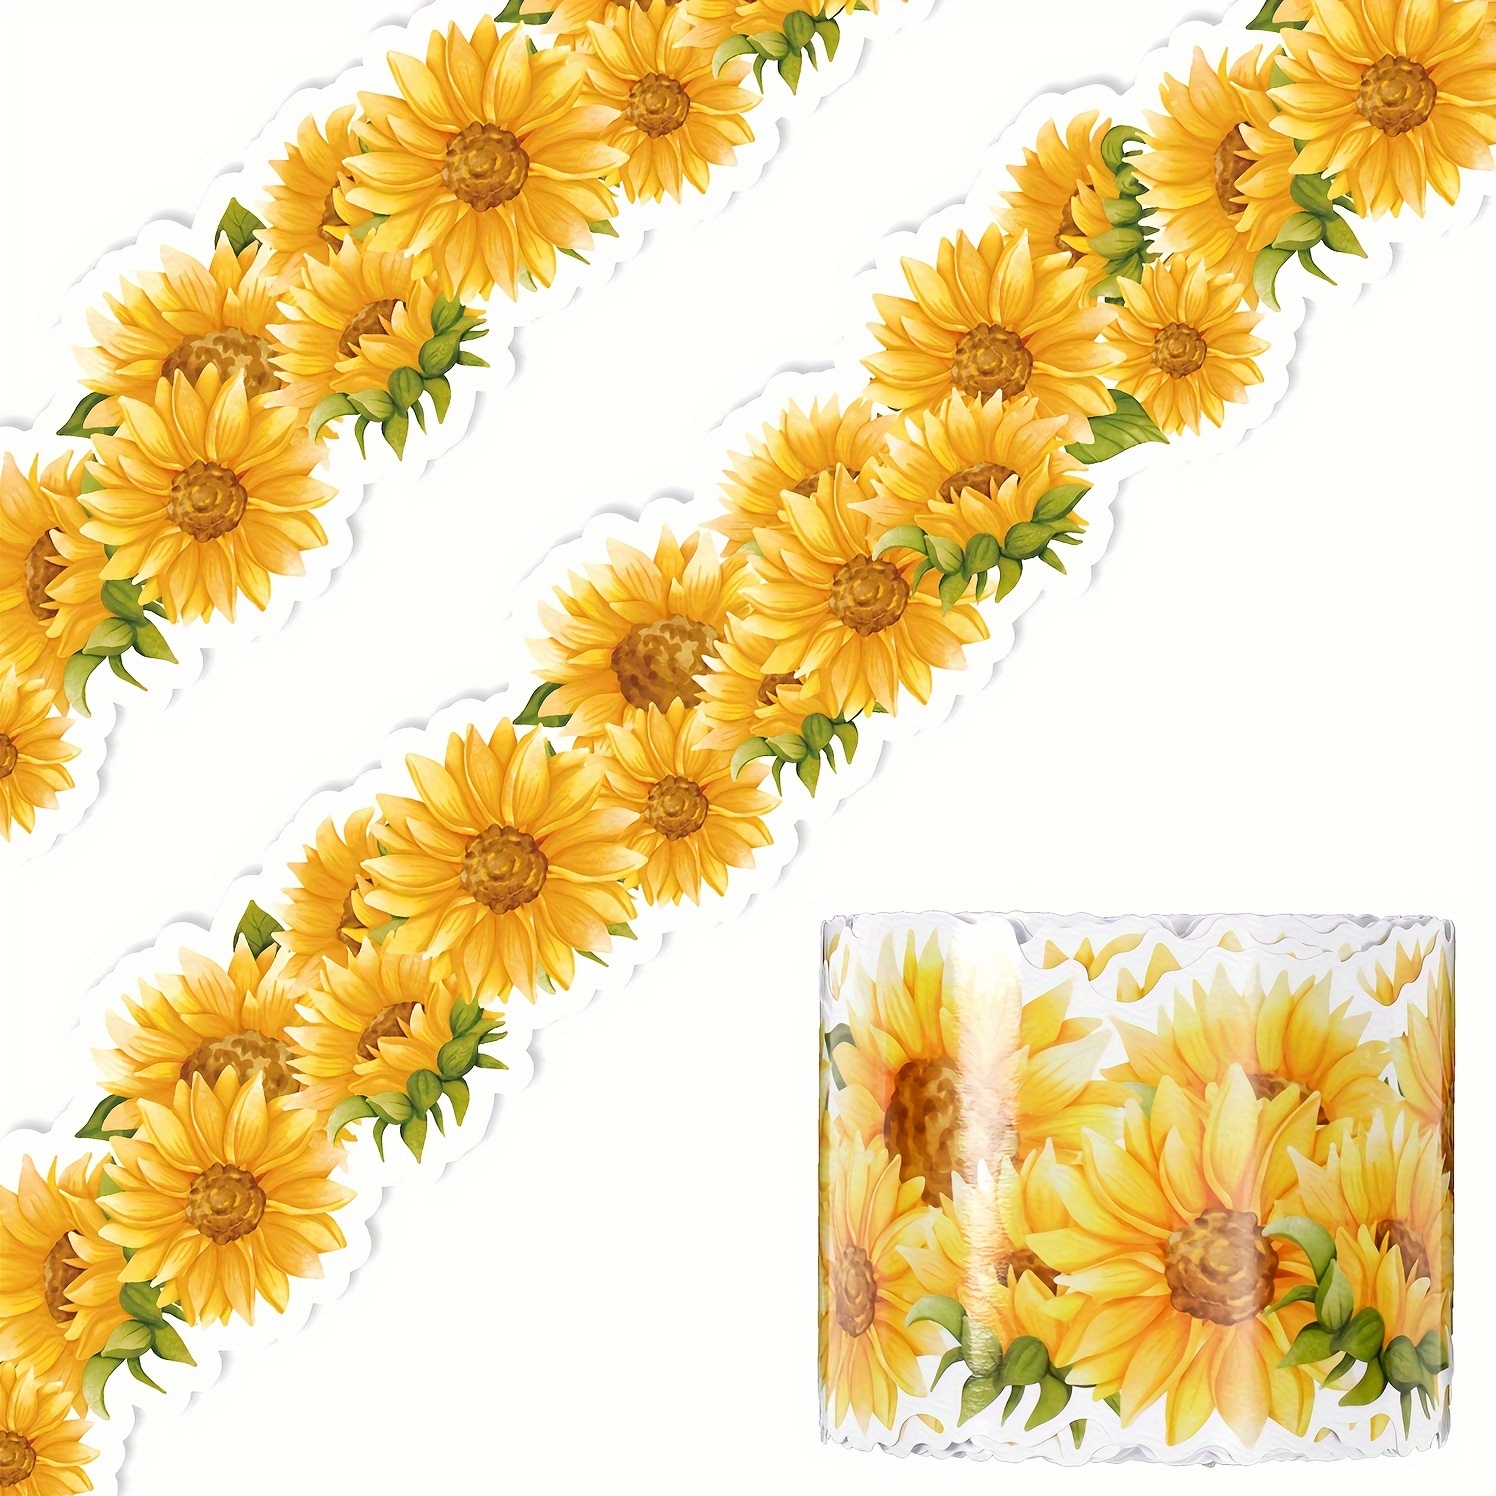 

49ft Sunflower Border Trim Roll - Springtime Floral Decor For Classroom, Office Chalkboard & Party Walls